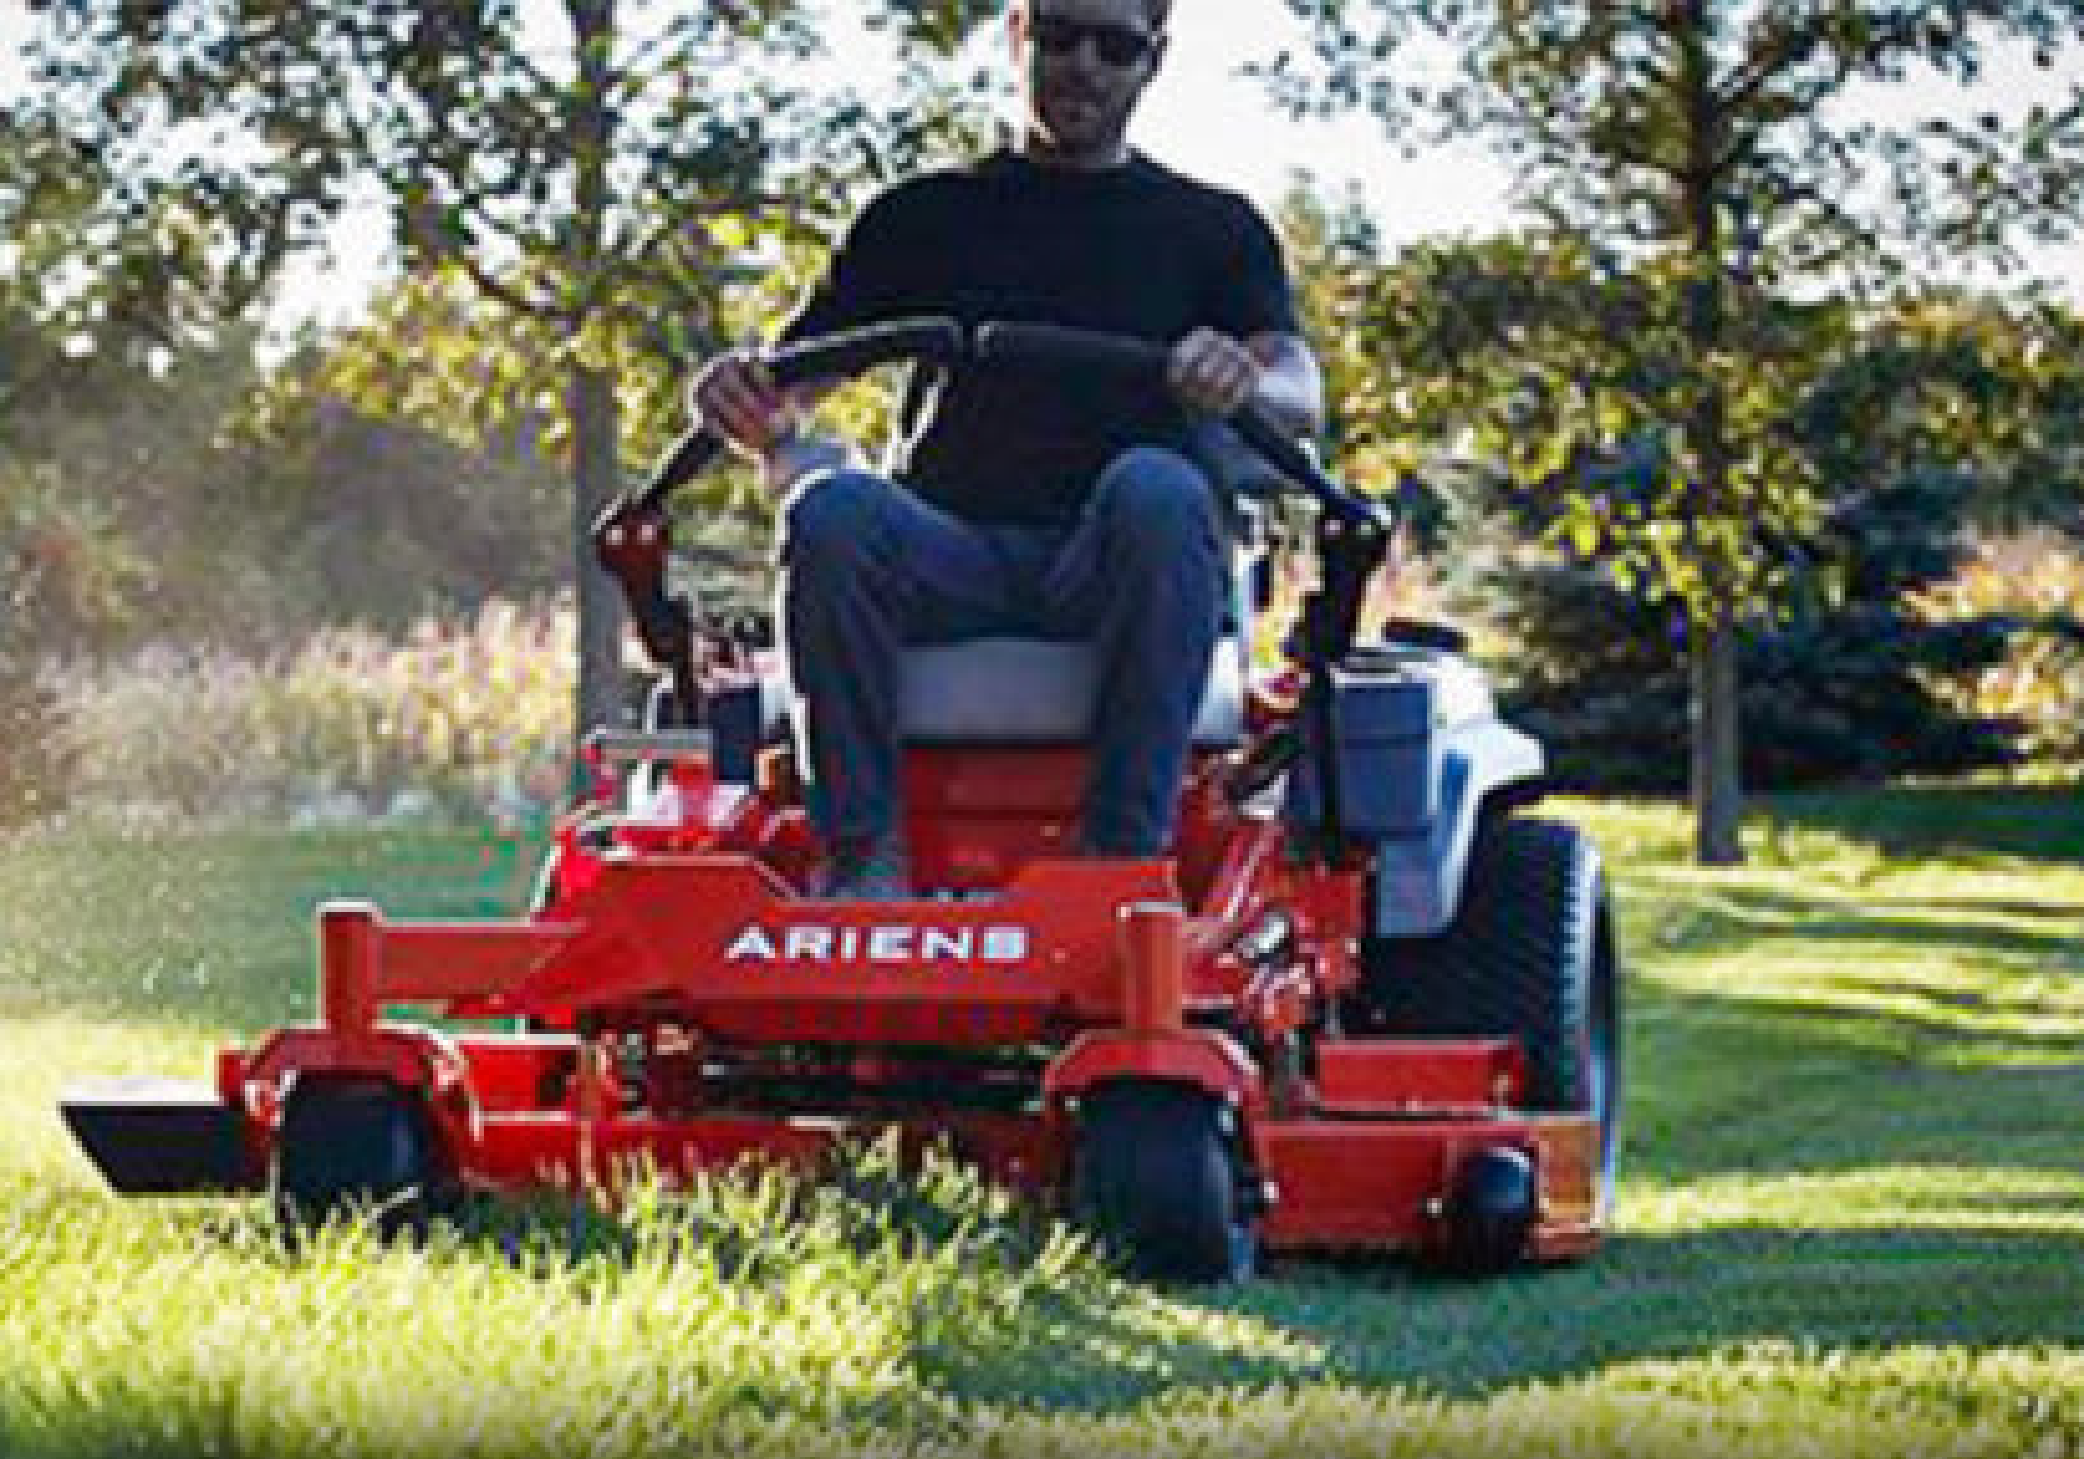 A man is on a large riding lawnmower cutting a lawn